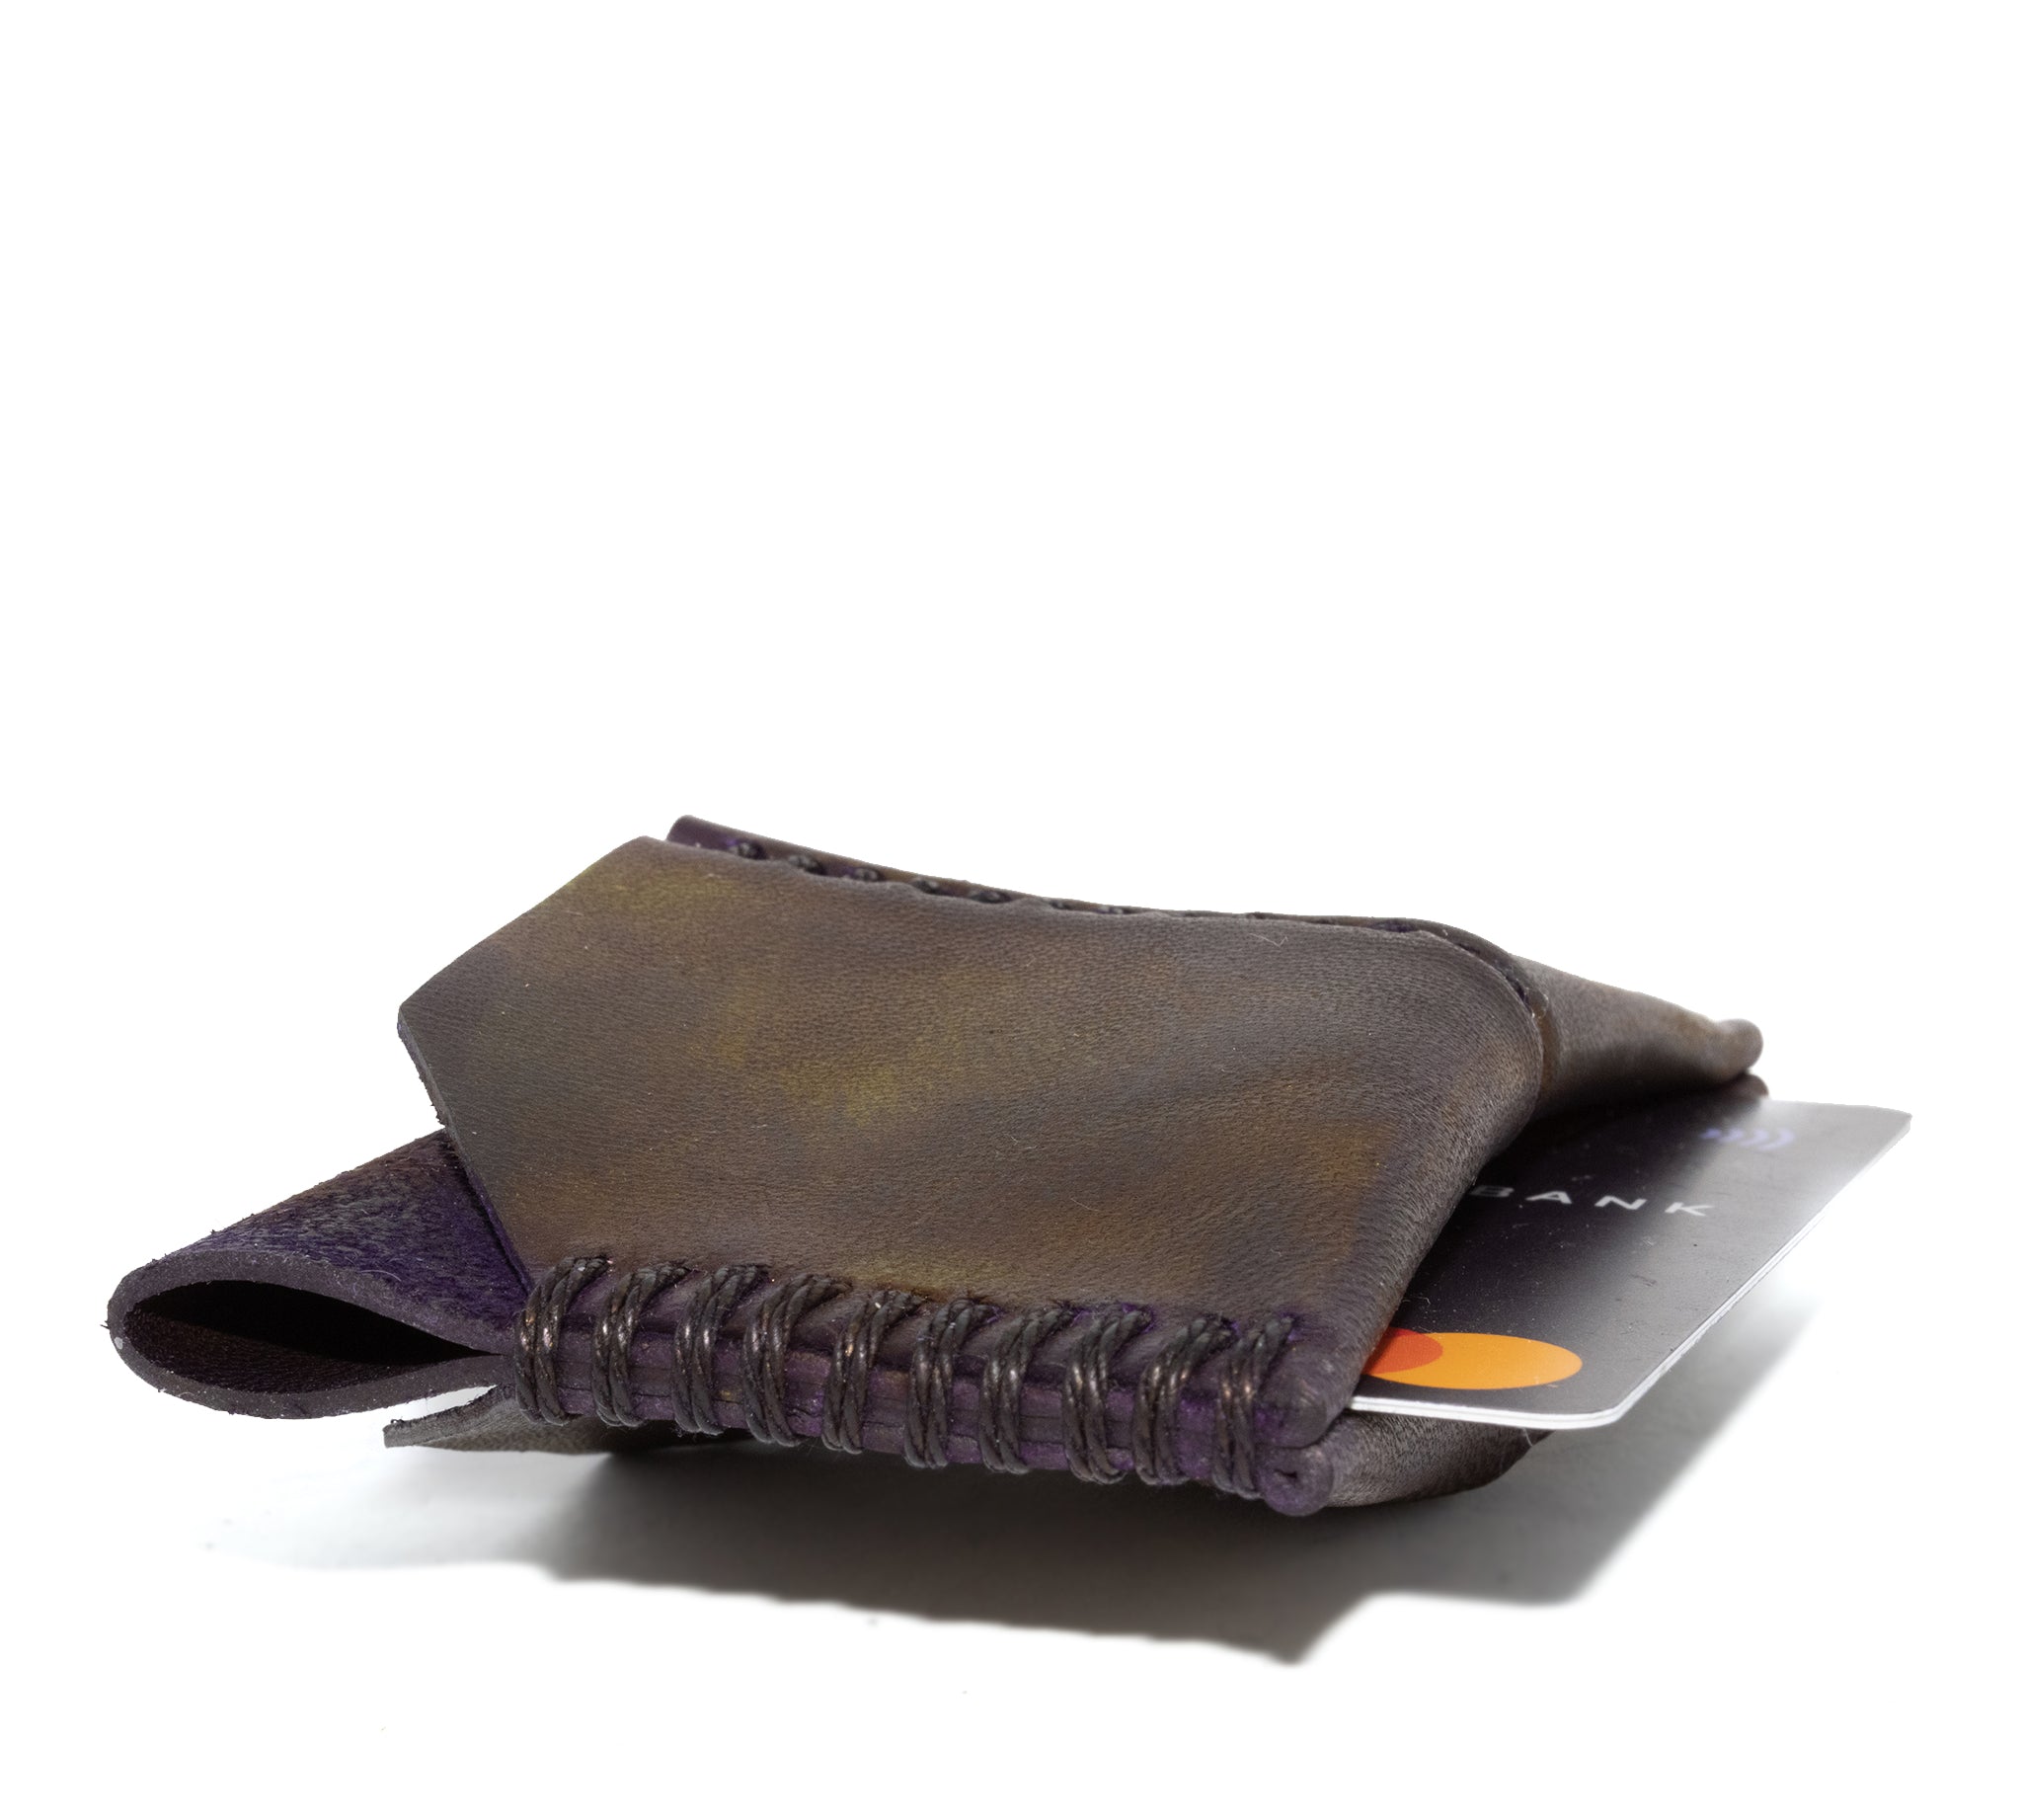 atelier skn hand dyed horse leather cardholder